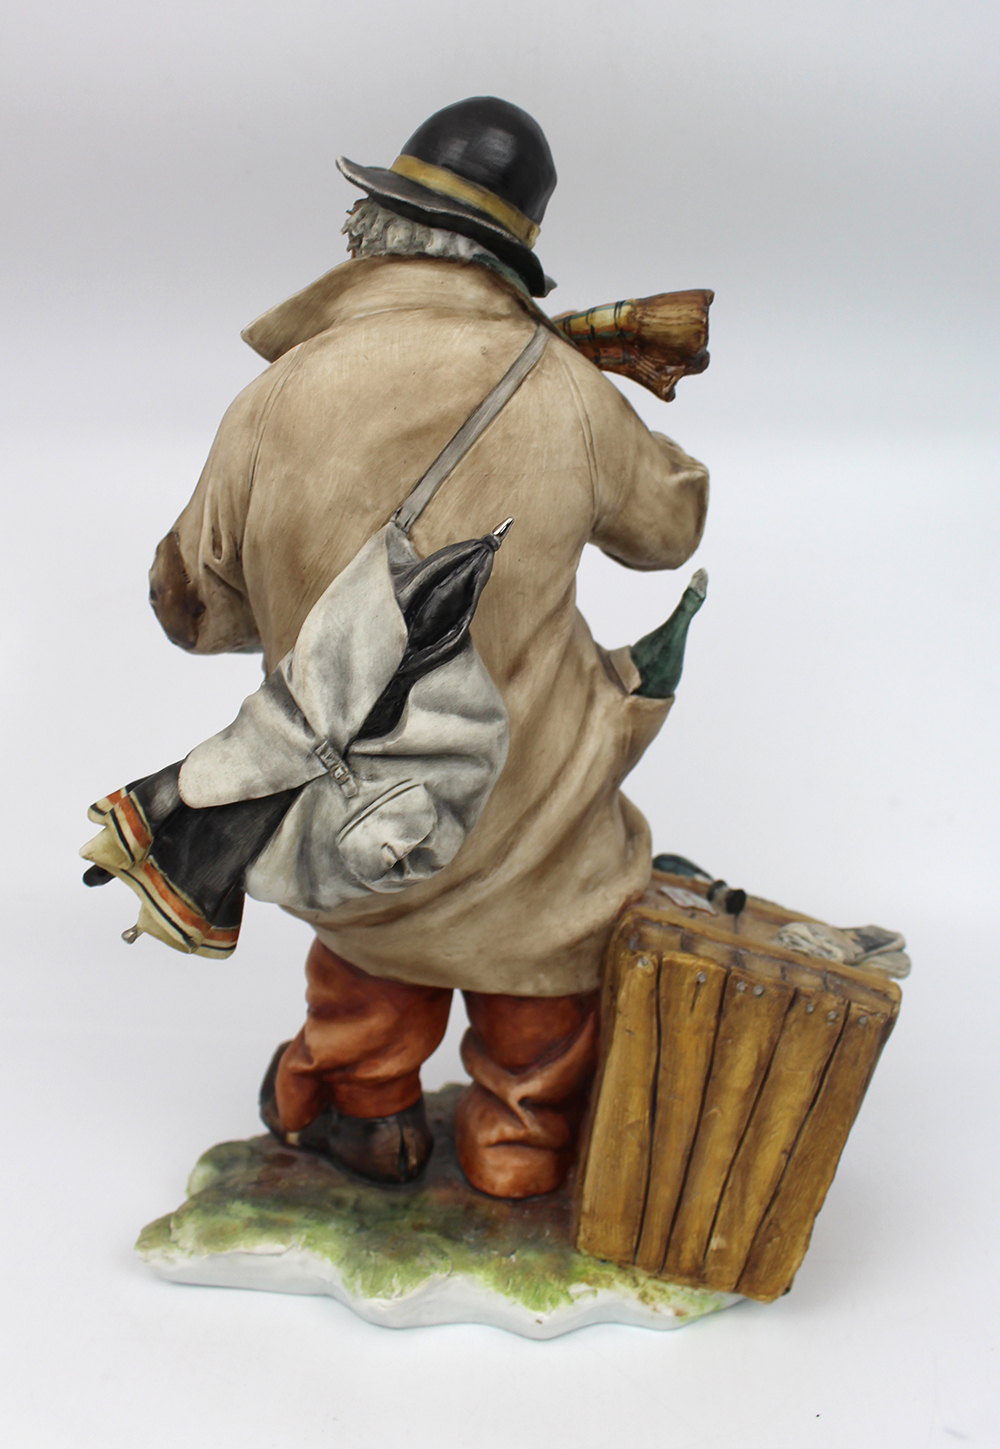 Capodimonte Tramp Patching His Coat by Tyche Bruno - Image 3 of 5